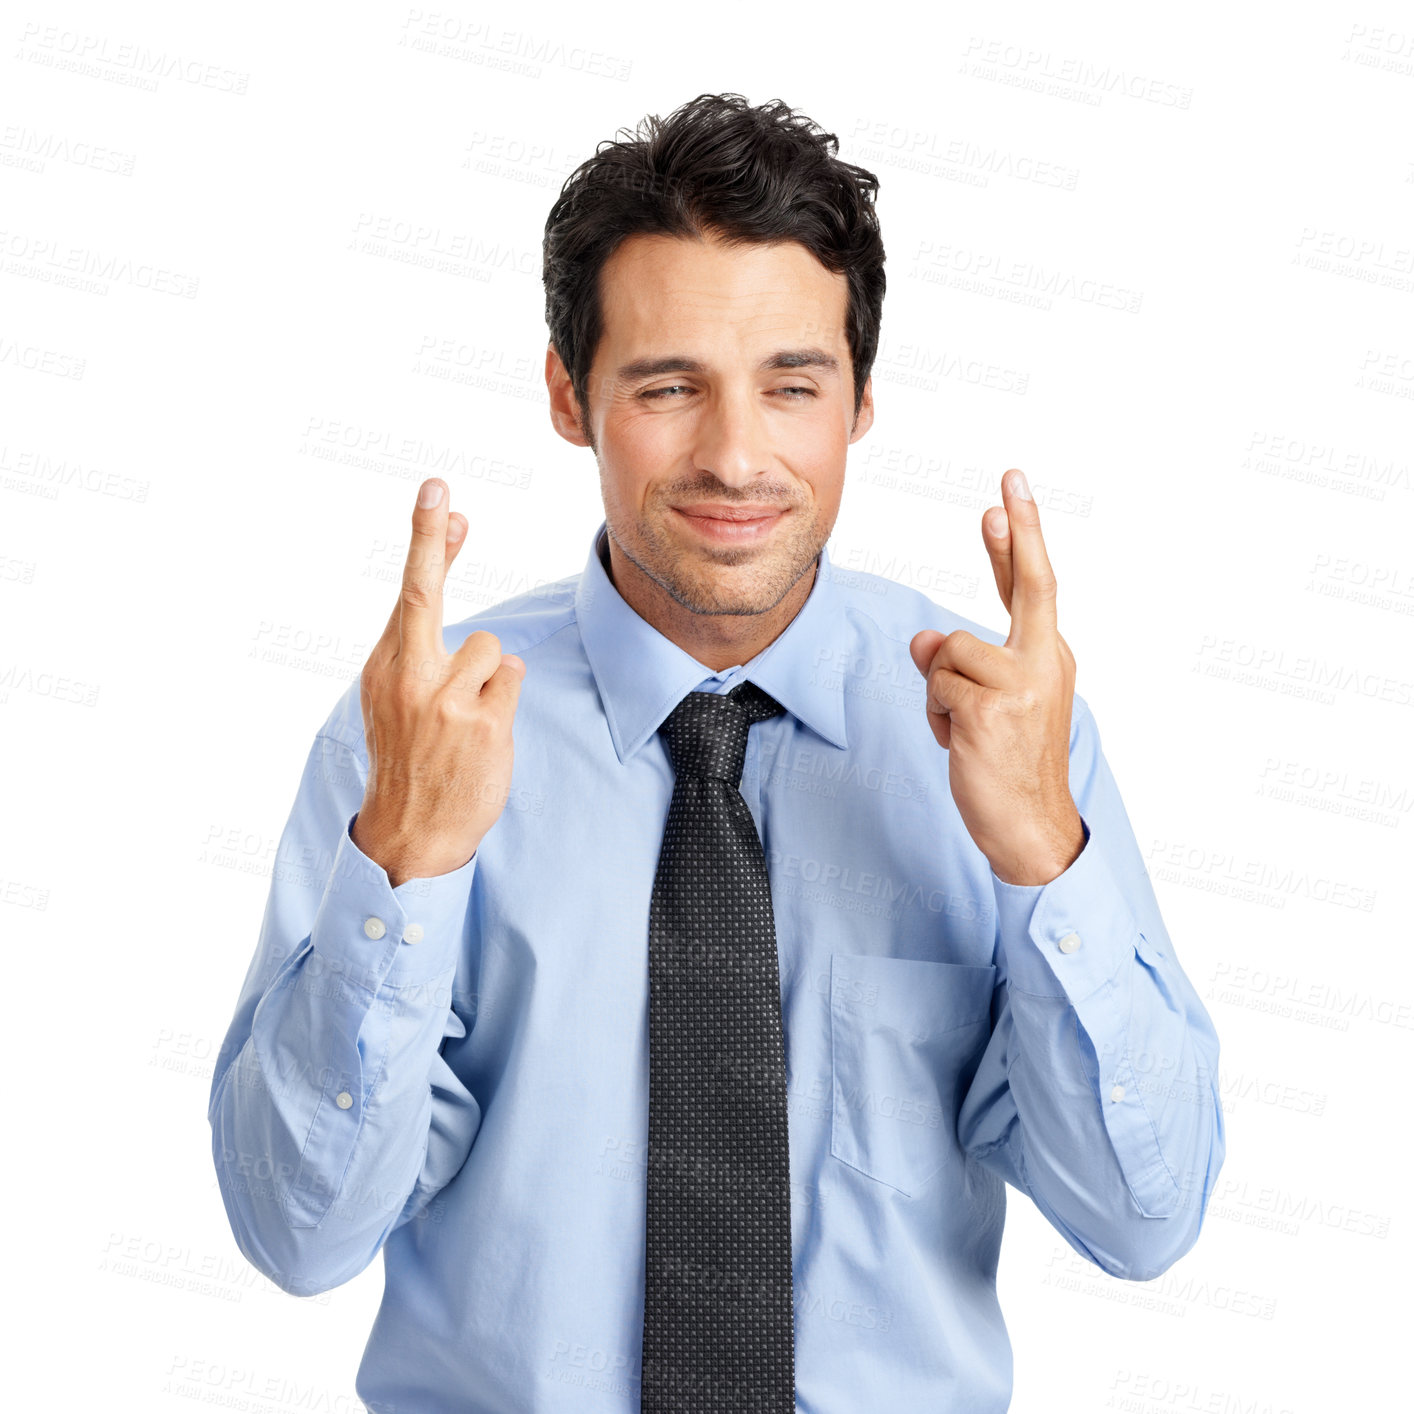 Buy stock photo Businessman hands, hope and fingers crossed on studio background mockup in new job or employment opportunity. Expression, nervous and luck hand gesture for worker anxiety, nervous or positive change